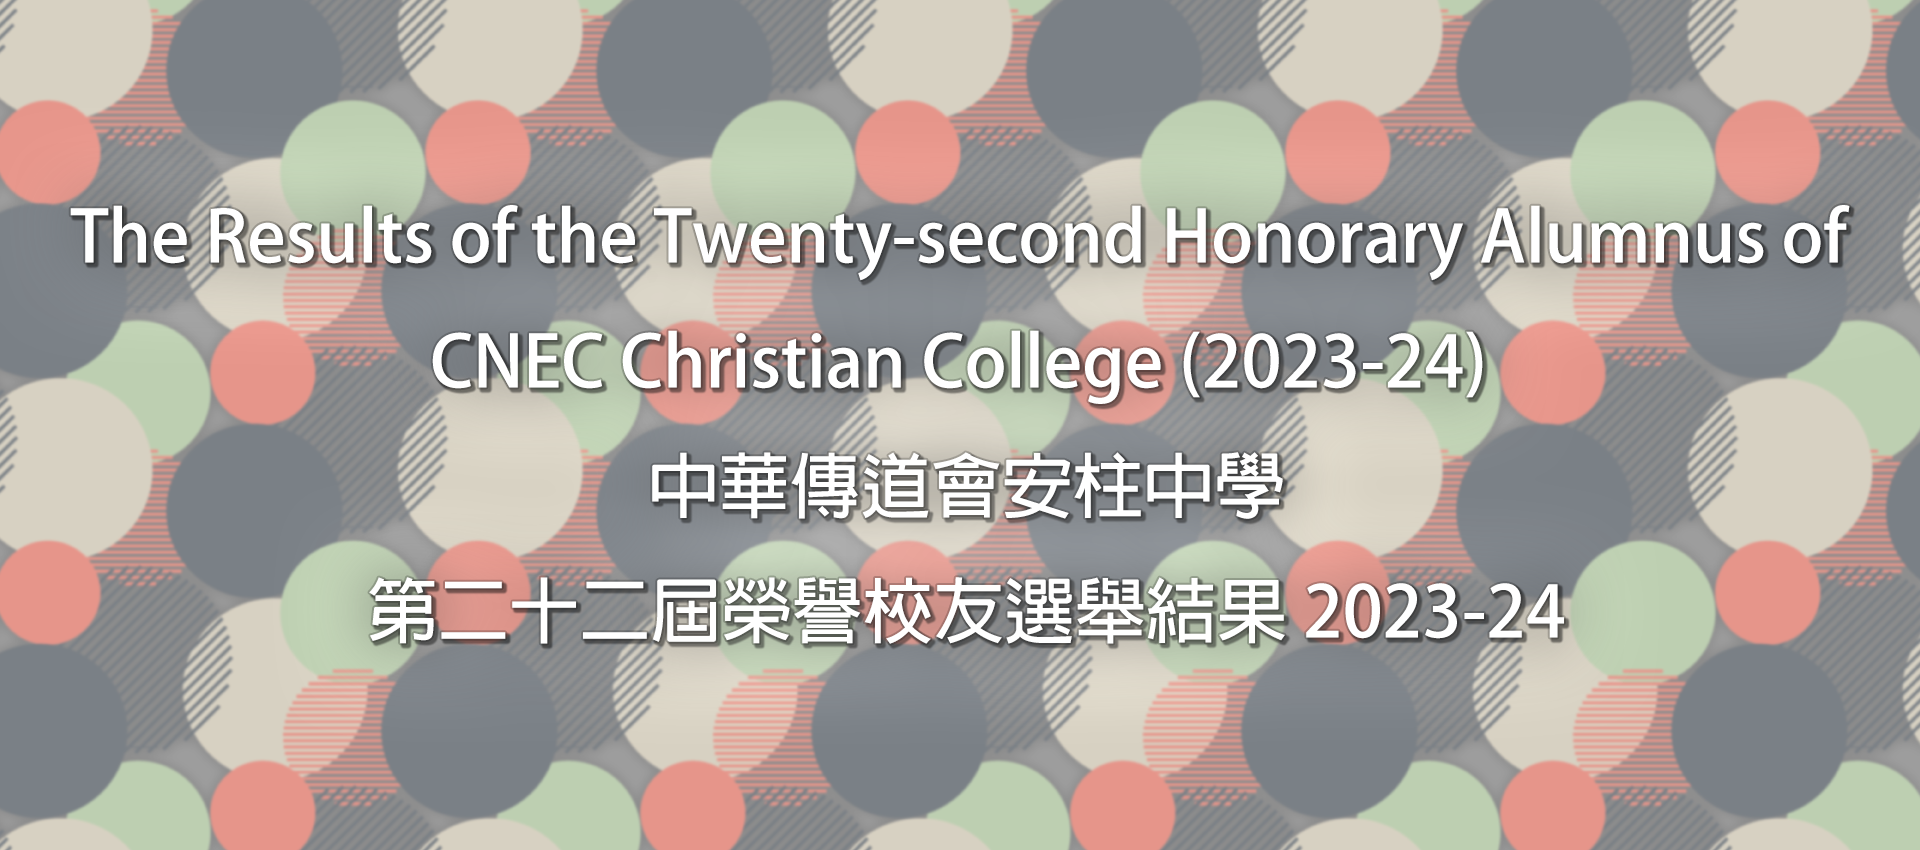 The Results of the Twenty-second Honorary Alumnus of CNEC Christian College (2023-24)